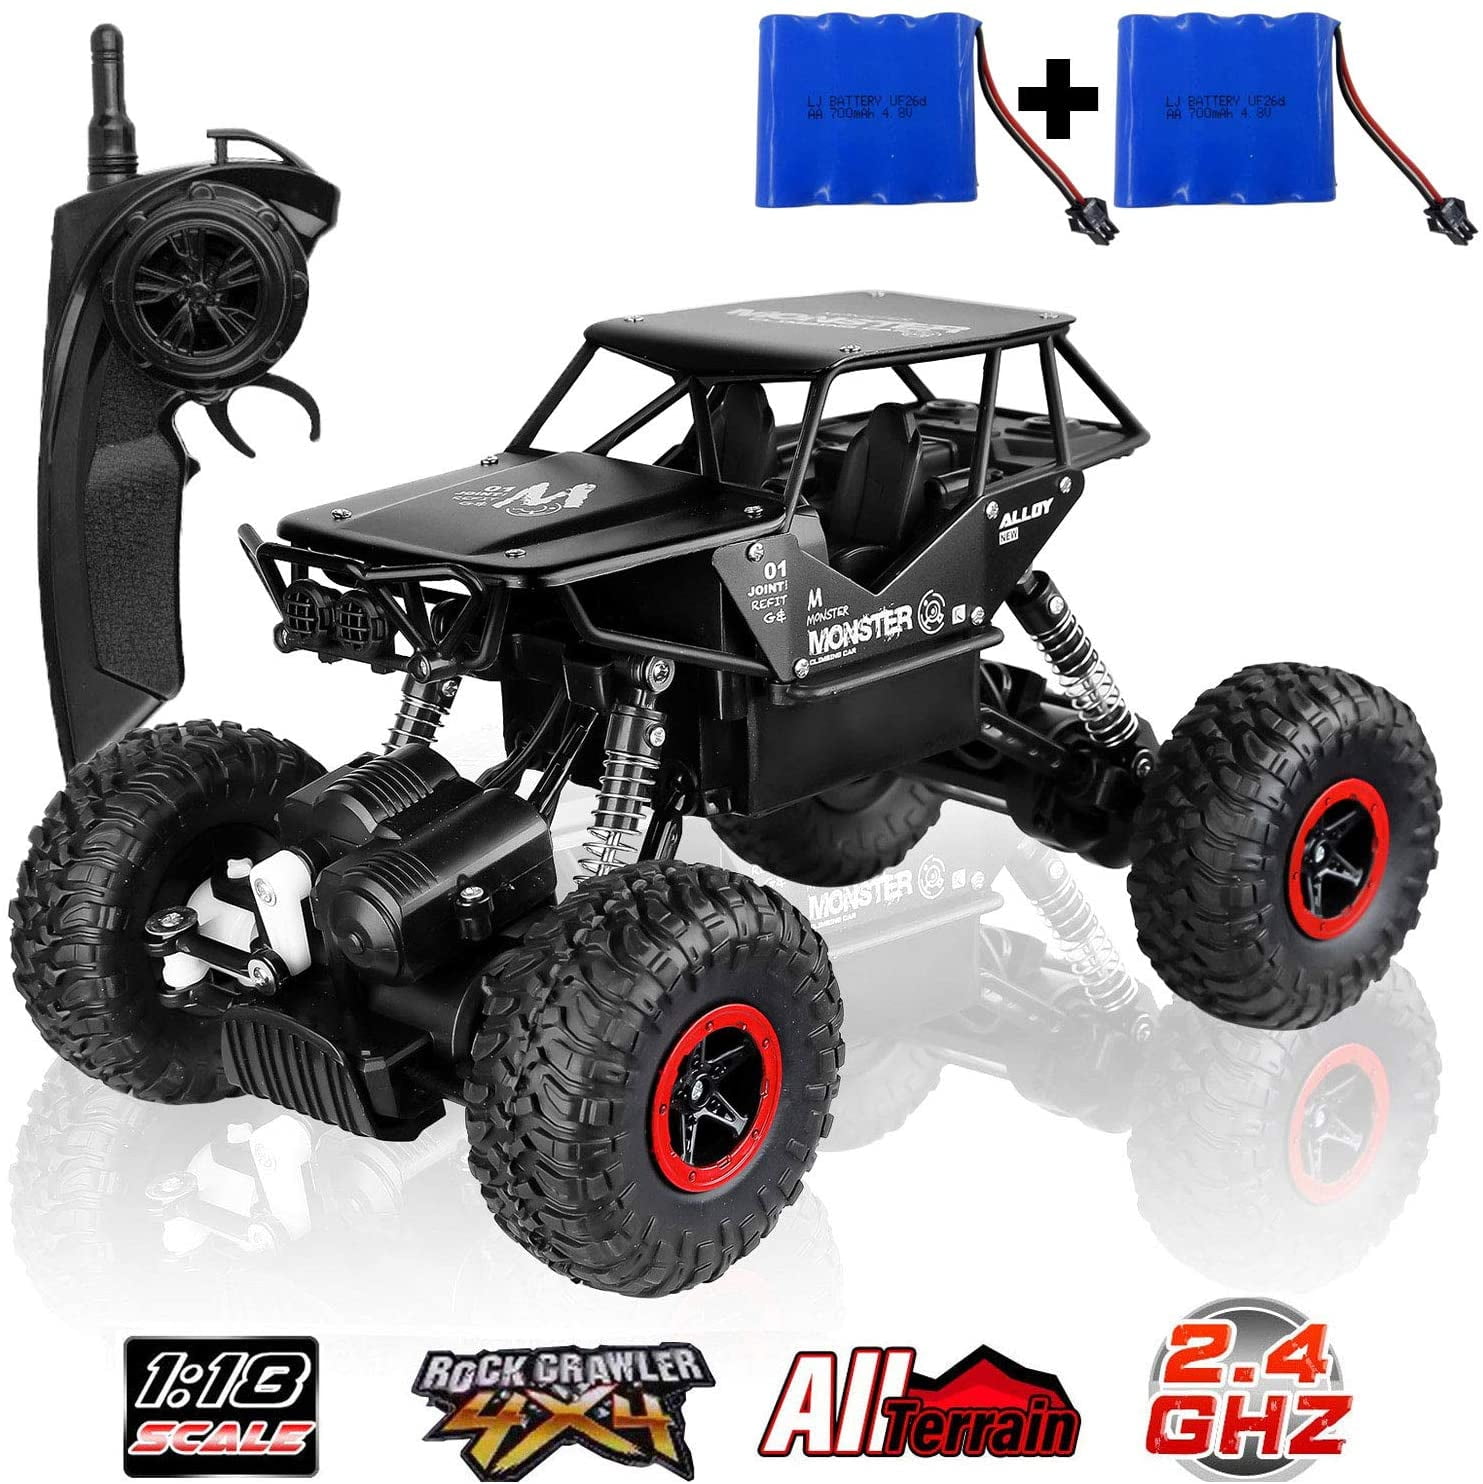 4x4 off road buggy plans